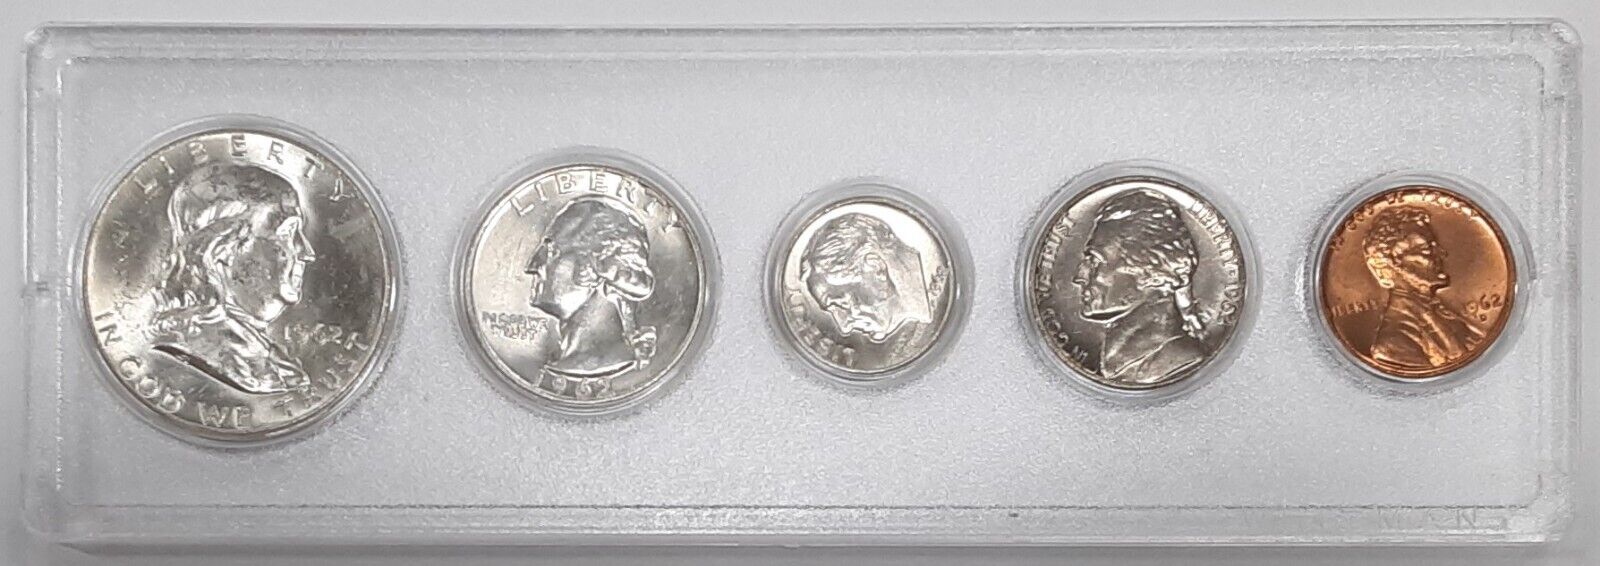 1962-D US Uncirculated Year Set with Silver Half Quarter and Dime 5 Coins Total